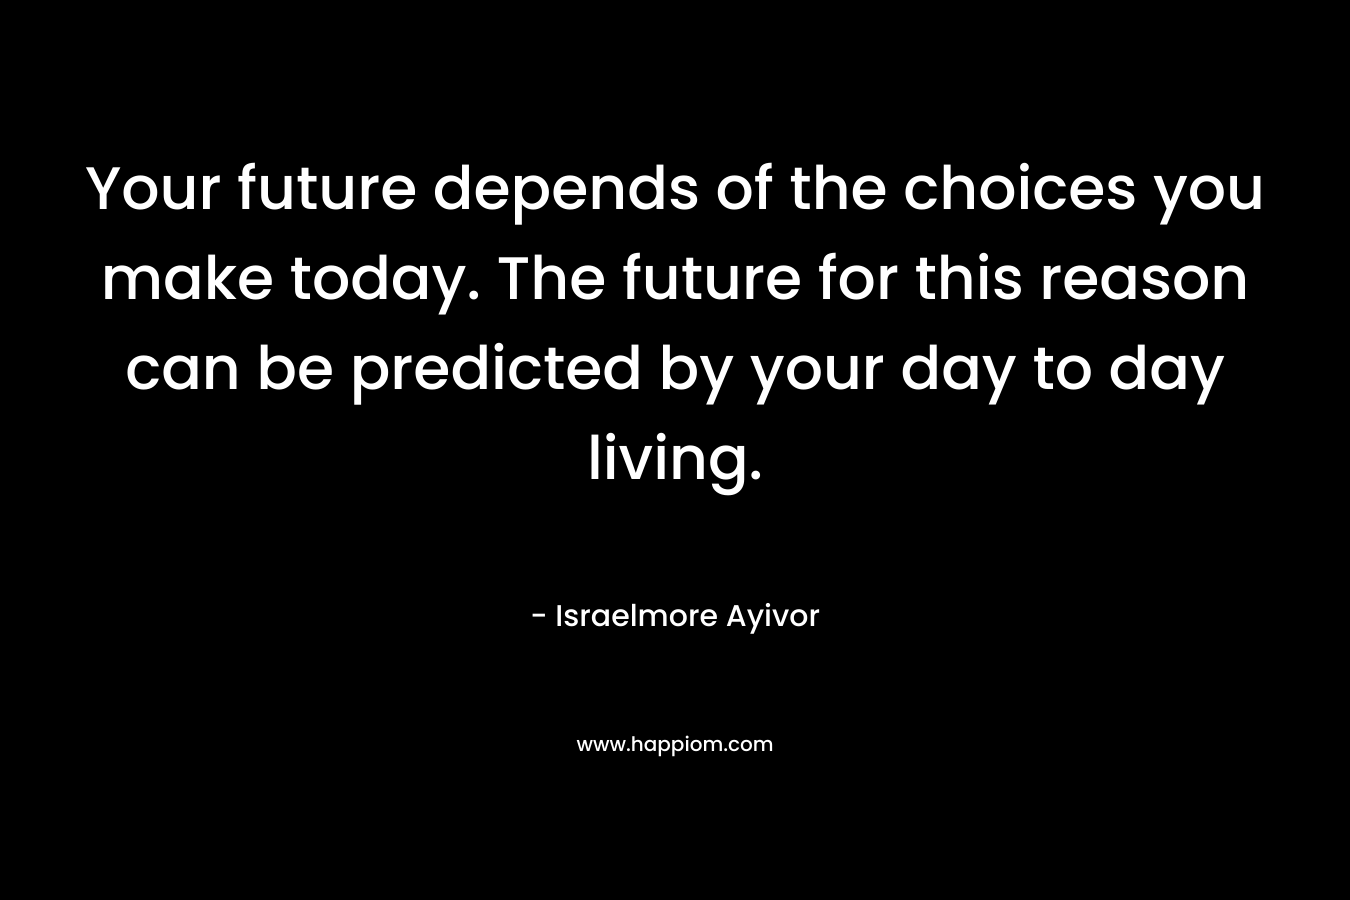 Your future depends of the choices you make today. The future for this reason can be predicted by your day to day living.